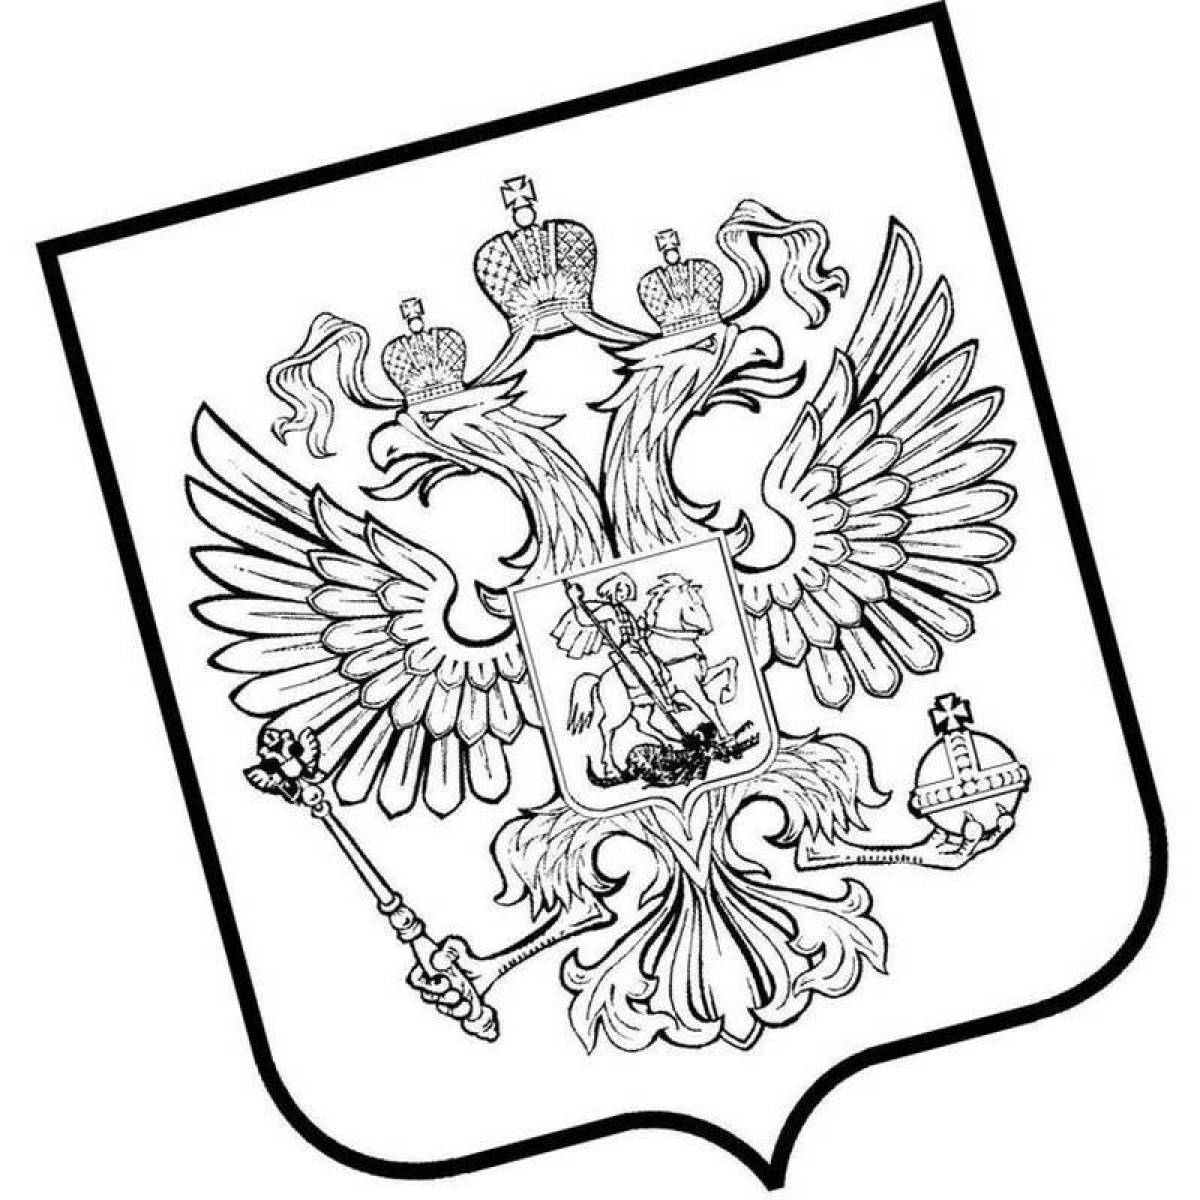 Russian coat of arms #17